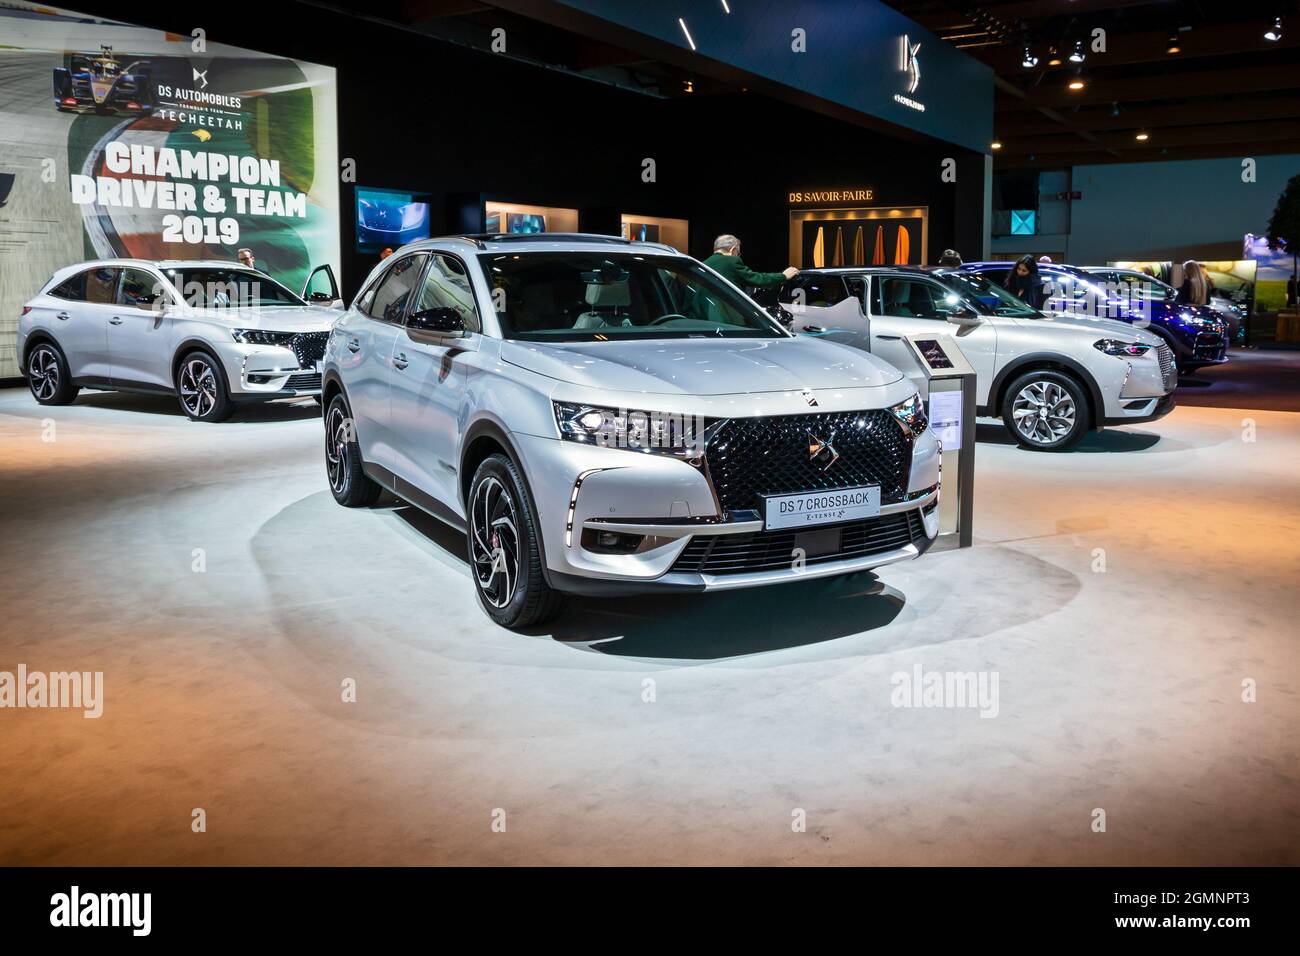 DS7 Crossback E-Tense new hybrid car model shown at the Autosalon 2020 Motor Show. Brussels, Belgium - January 9, 2020. Stock Photo